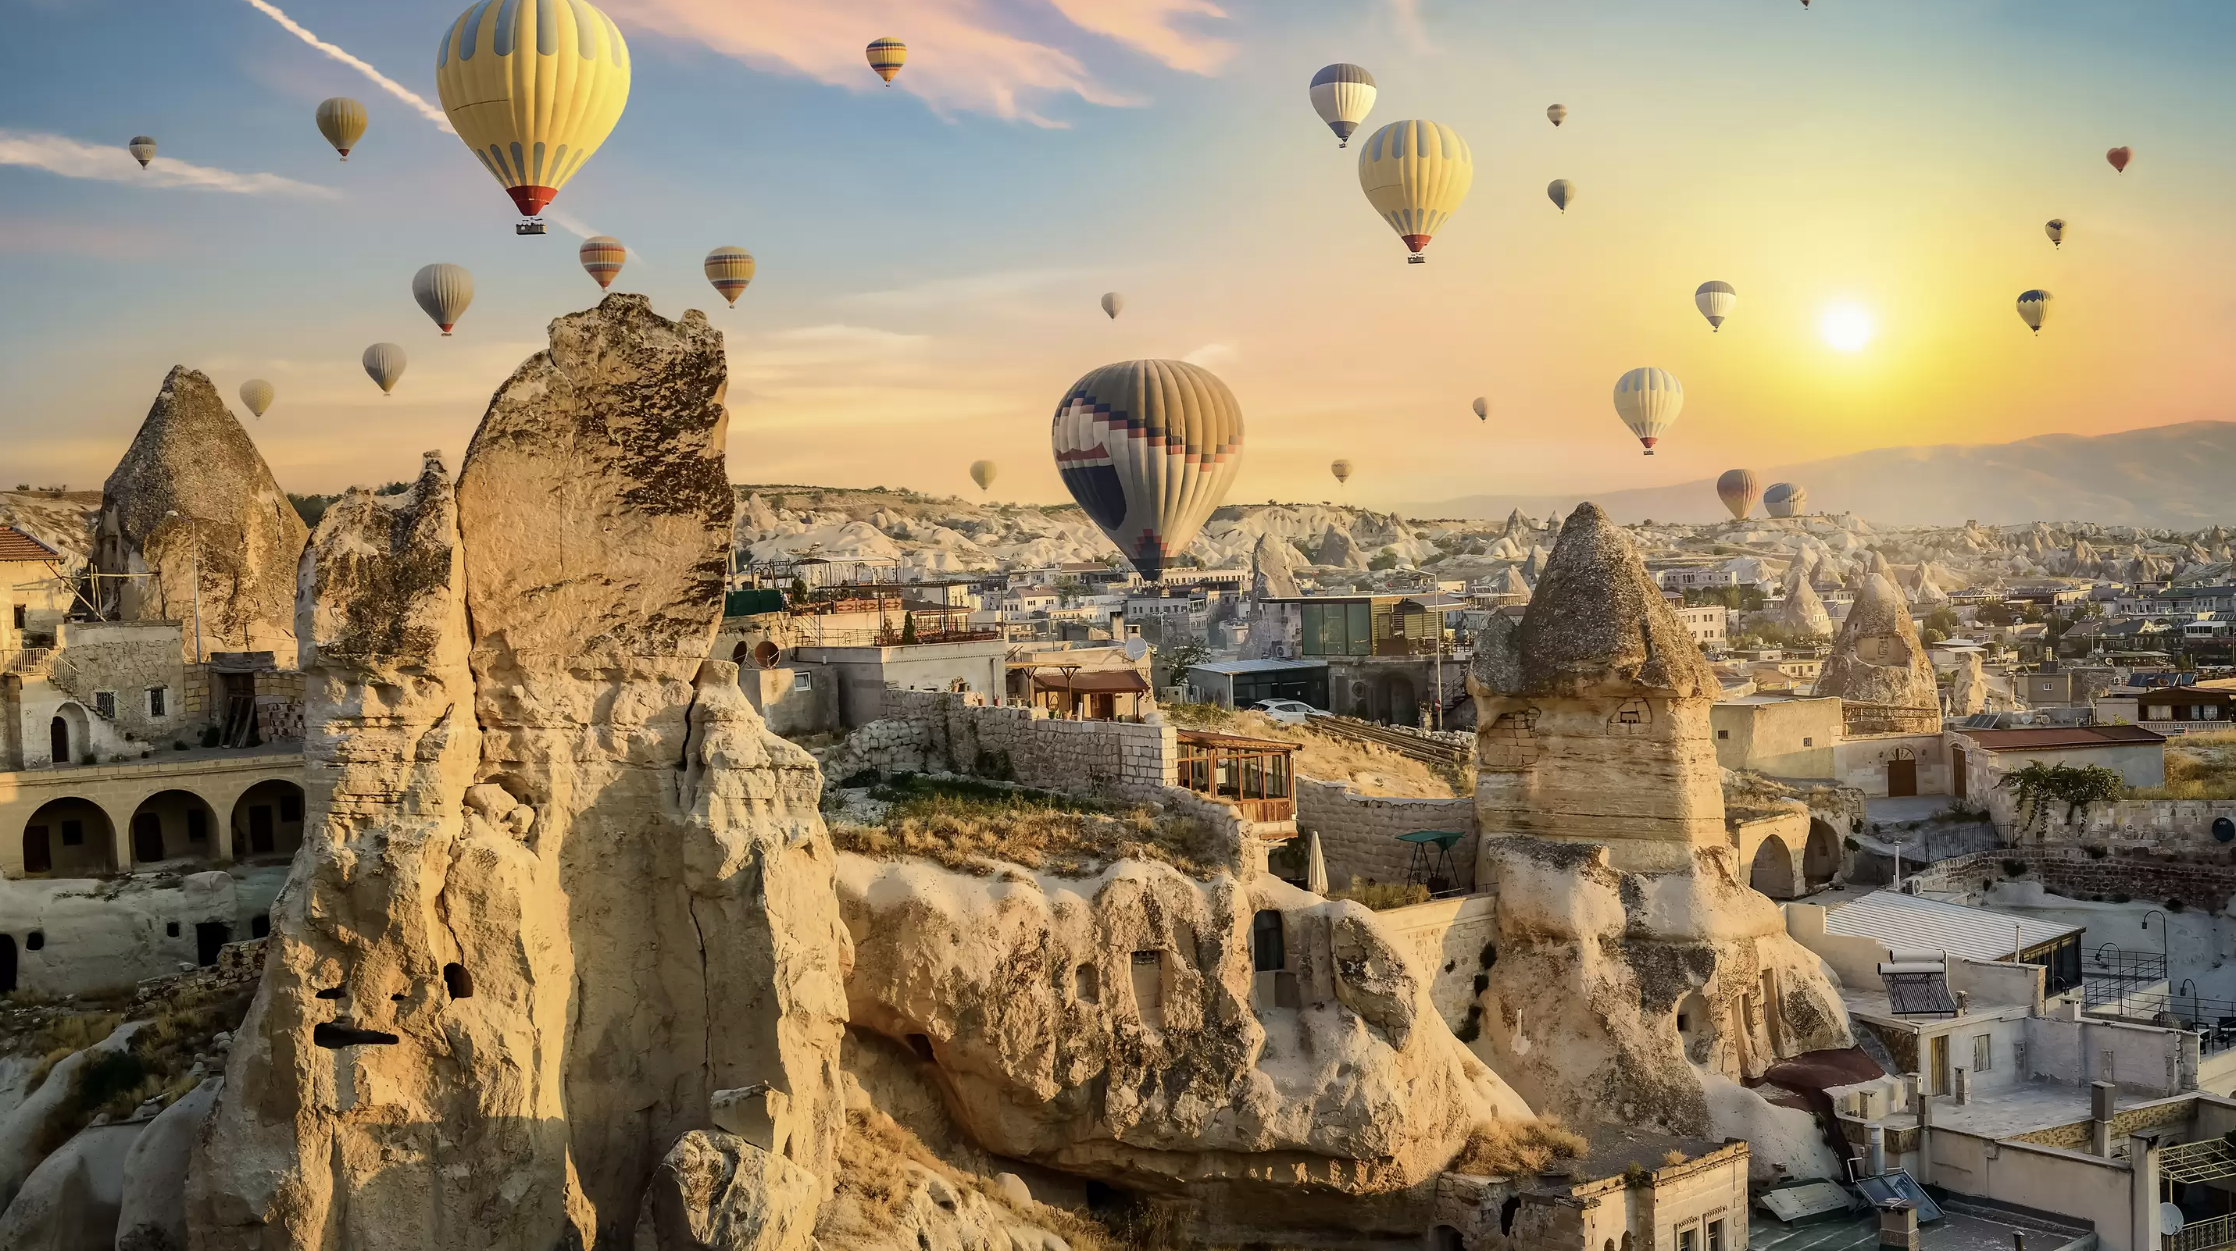 hot air balloons flying over a city